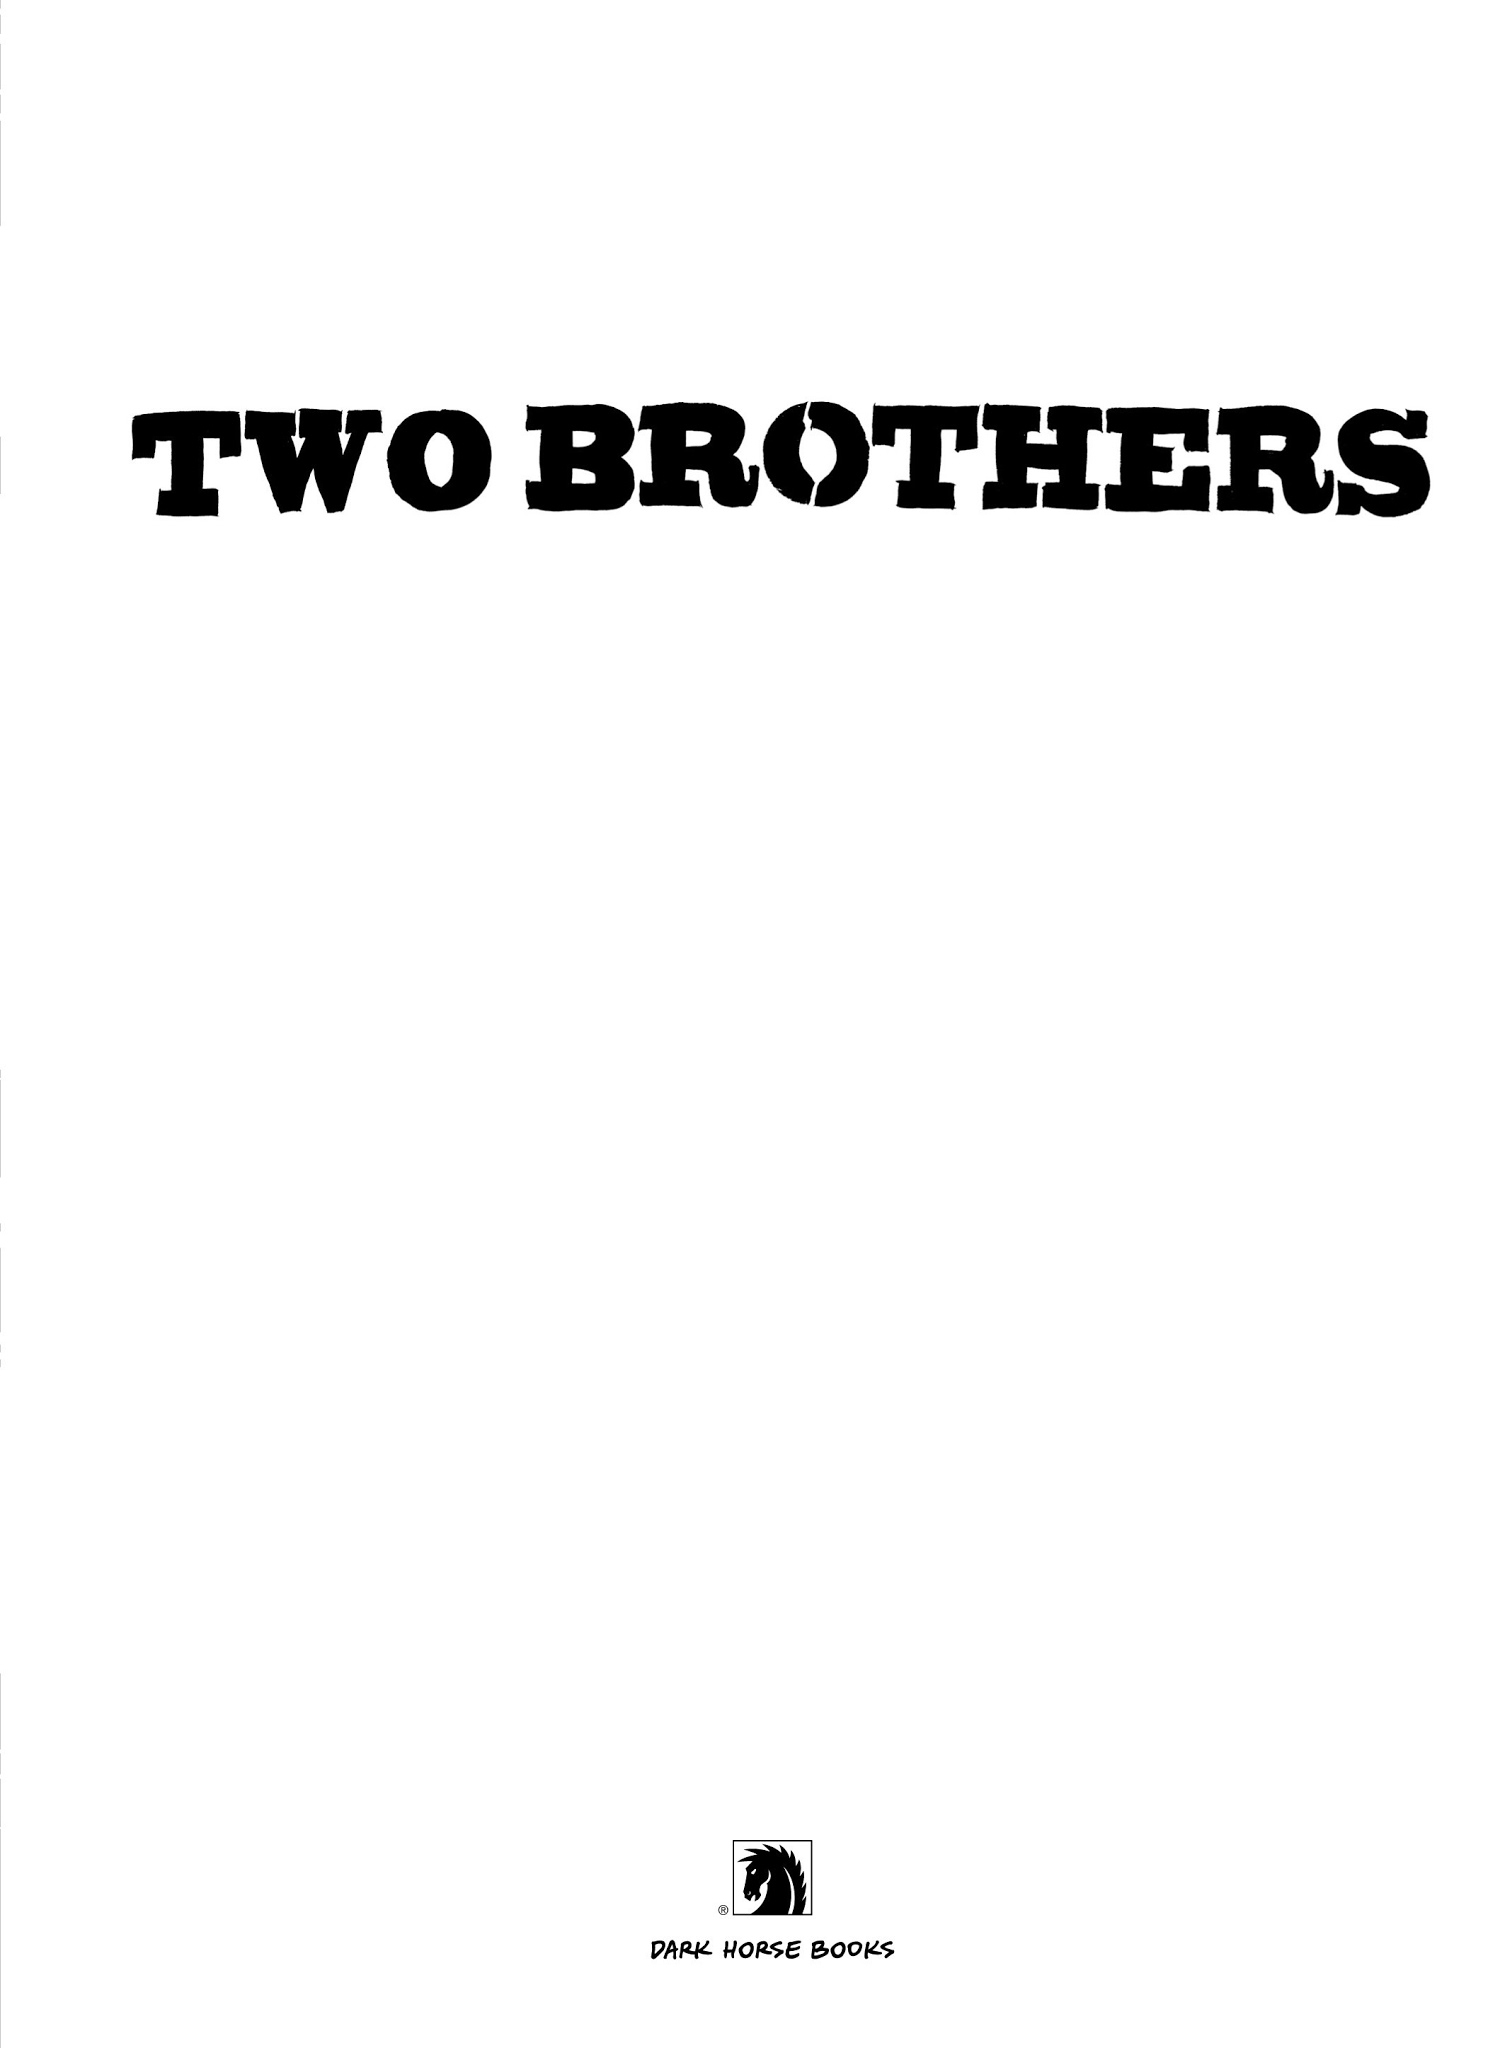 Read online Two Brothers comic -  Issue # TPB - 3